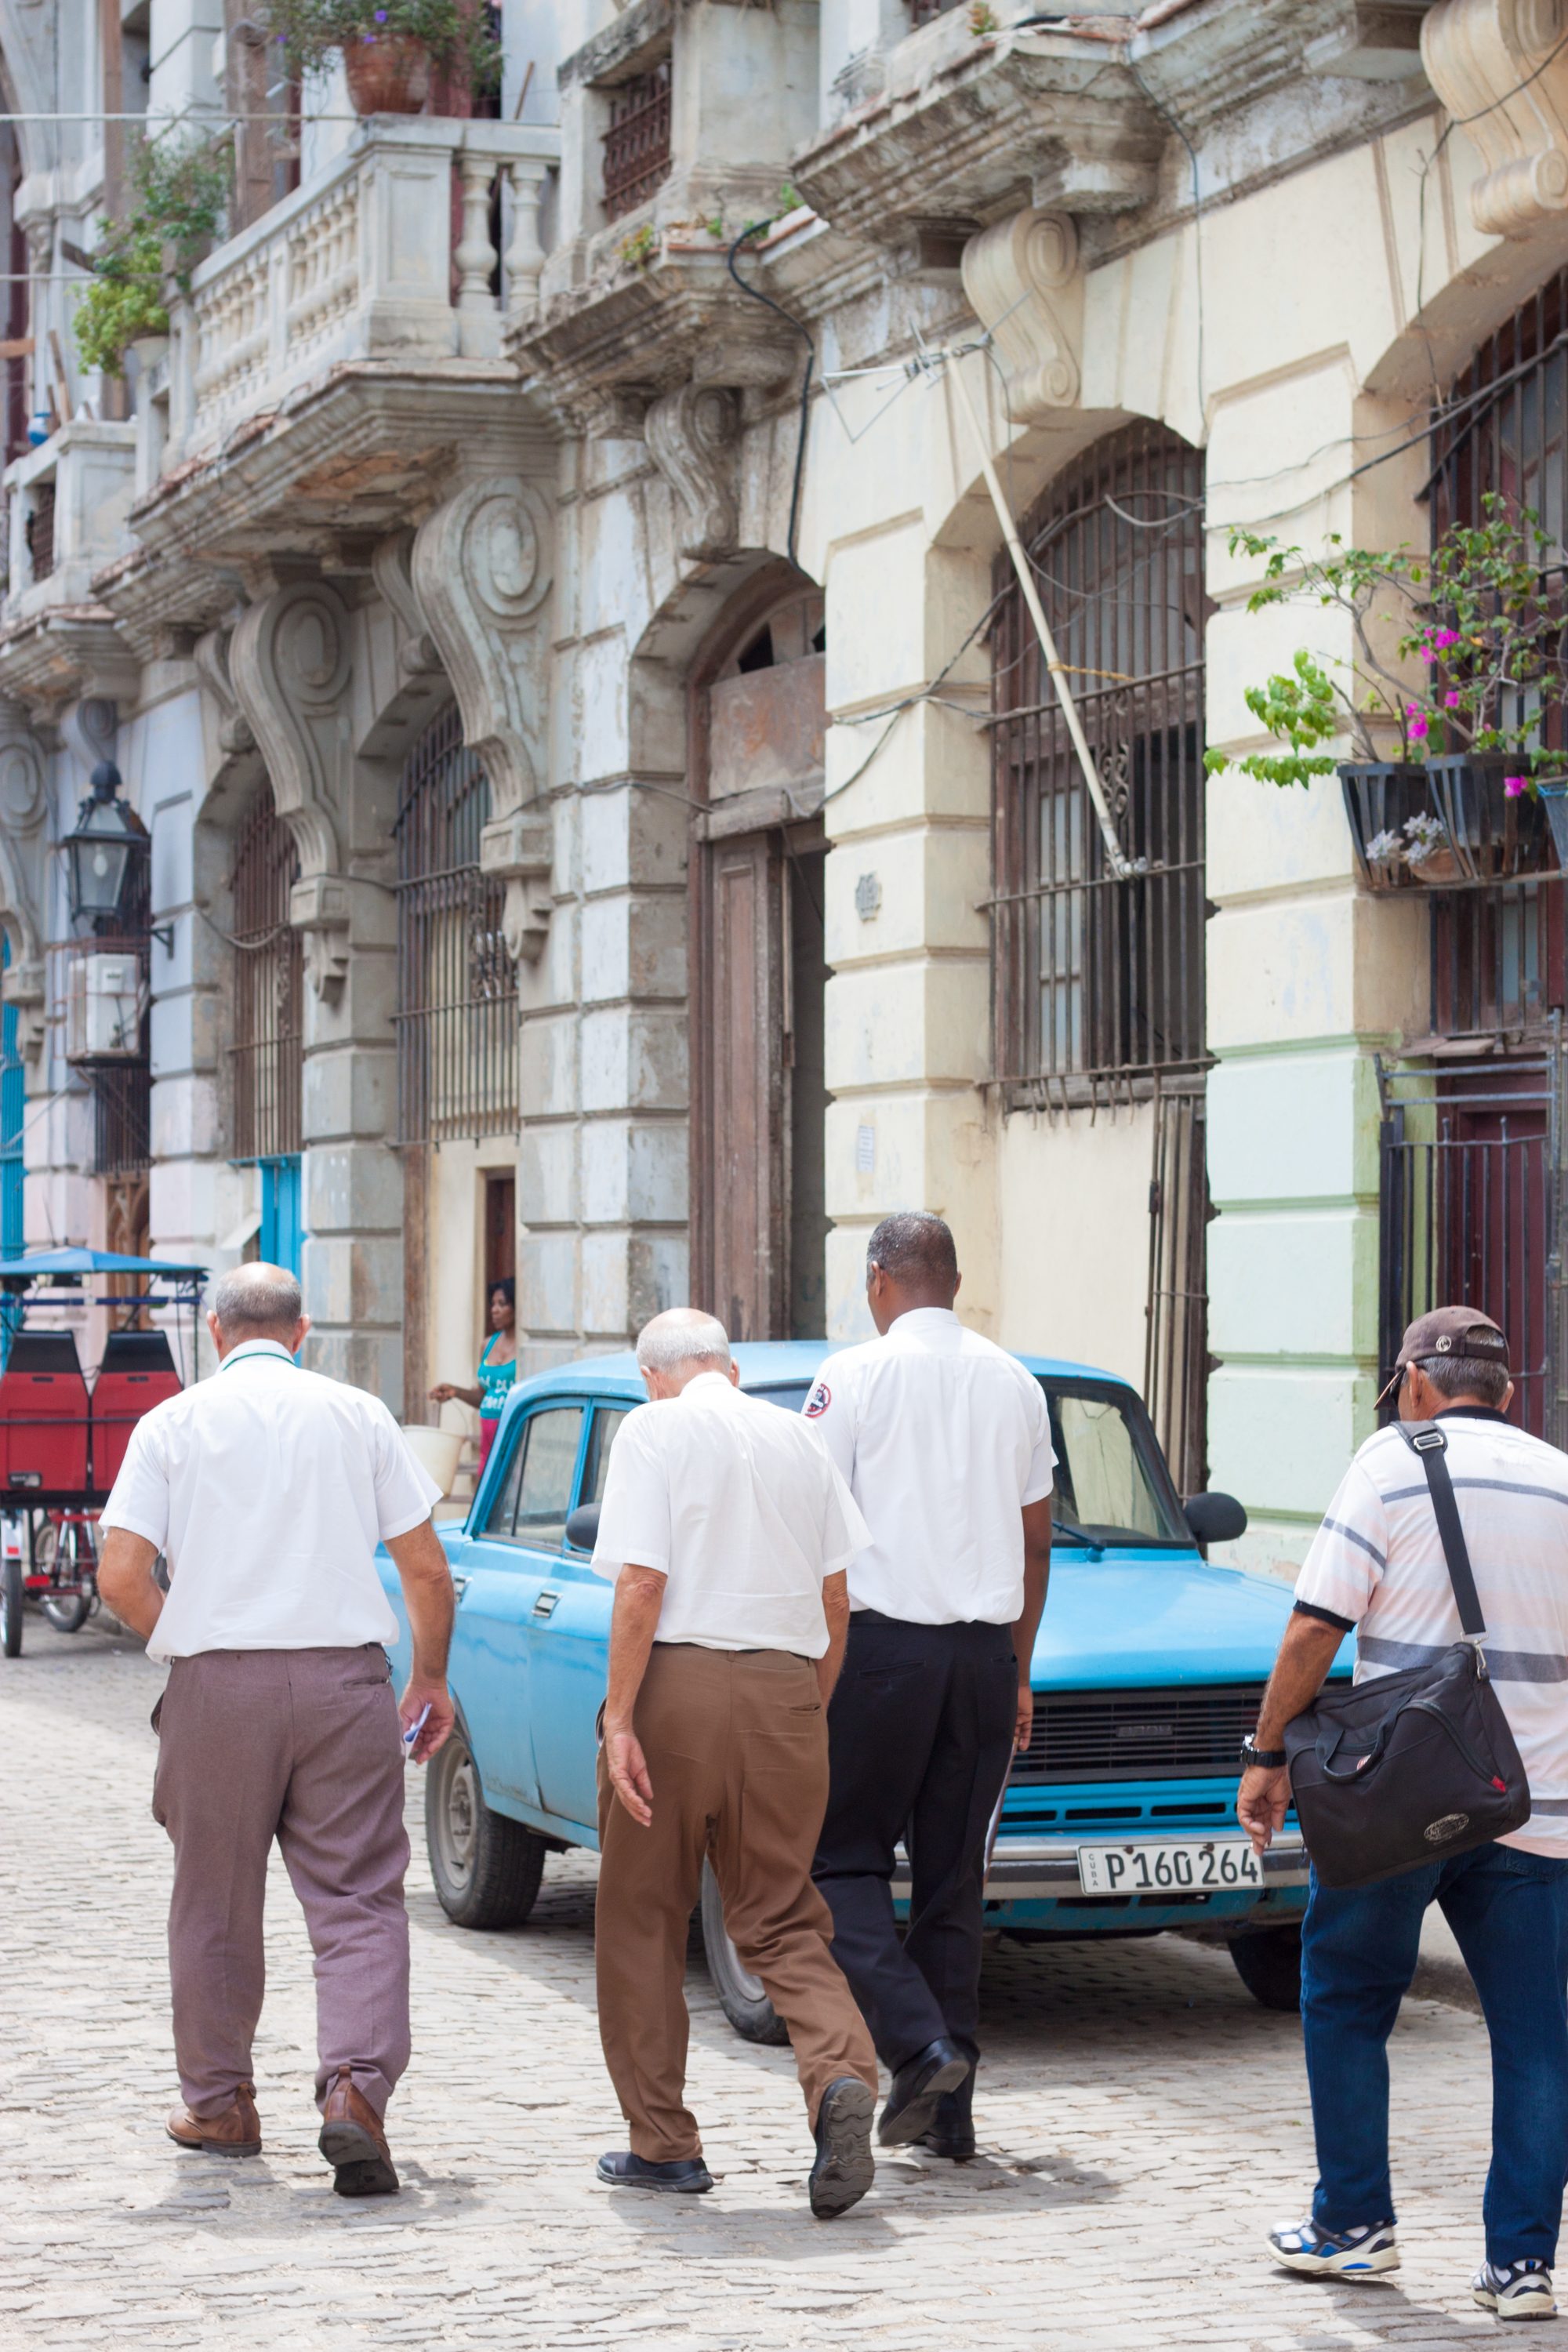 everything you need to know about traveling to cuba, what you need to know to travel to cuba, how to travel to cuba, cuba travel laws, how to travel to cuba, what do you need ot do to travel to cuba, tourism in cuba, traveling to cuba, cuba travel trips, the truth about cuba